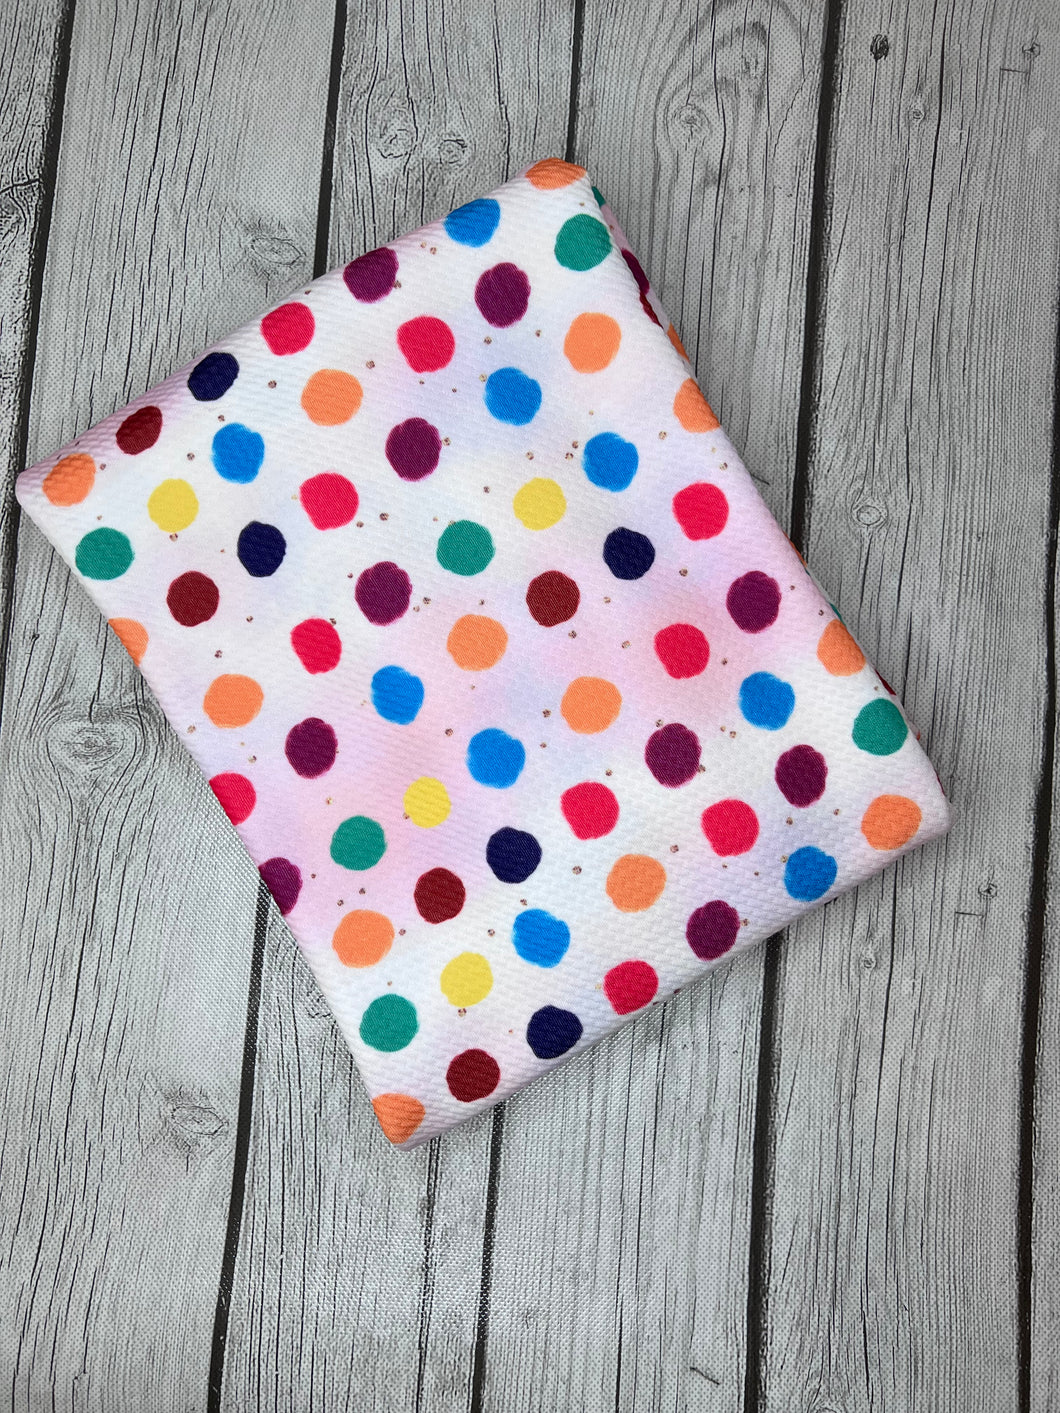 Ready to Ship Bullet Fiesta Polka Dots Shapes makes great bows, head wraps, bummies, and more.